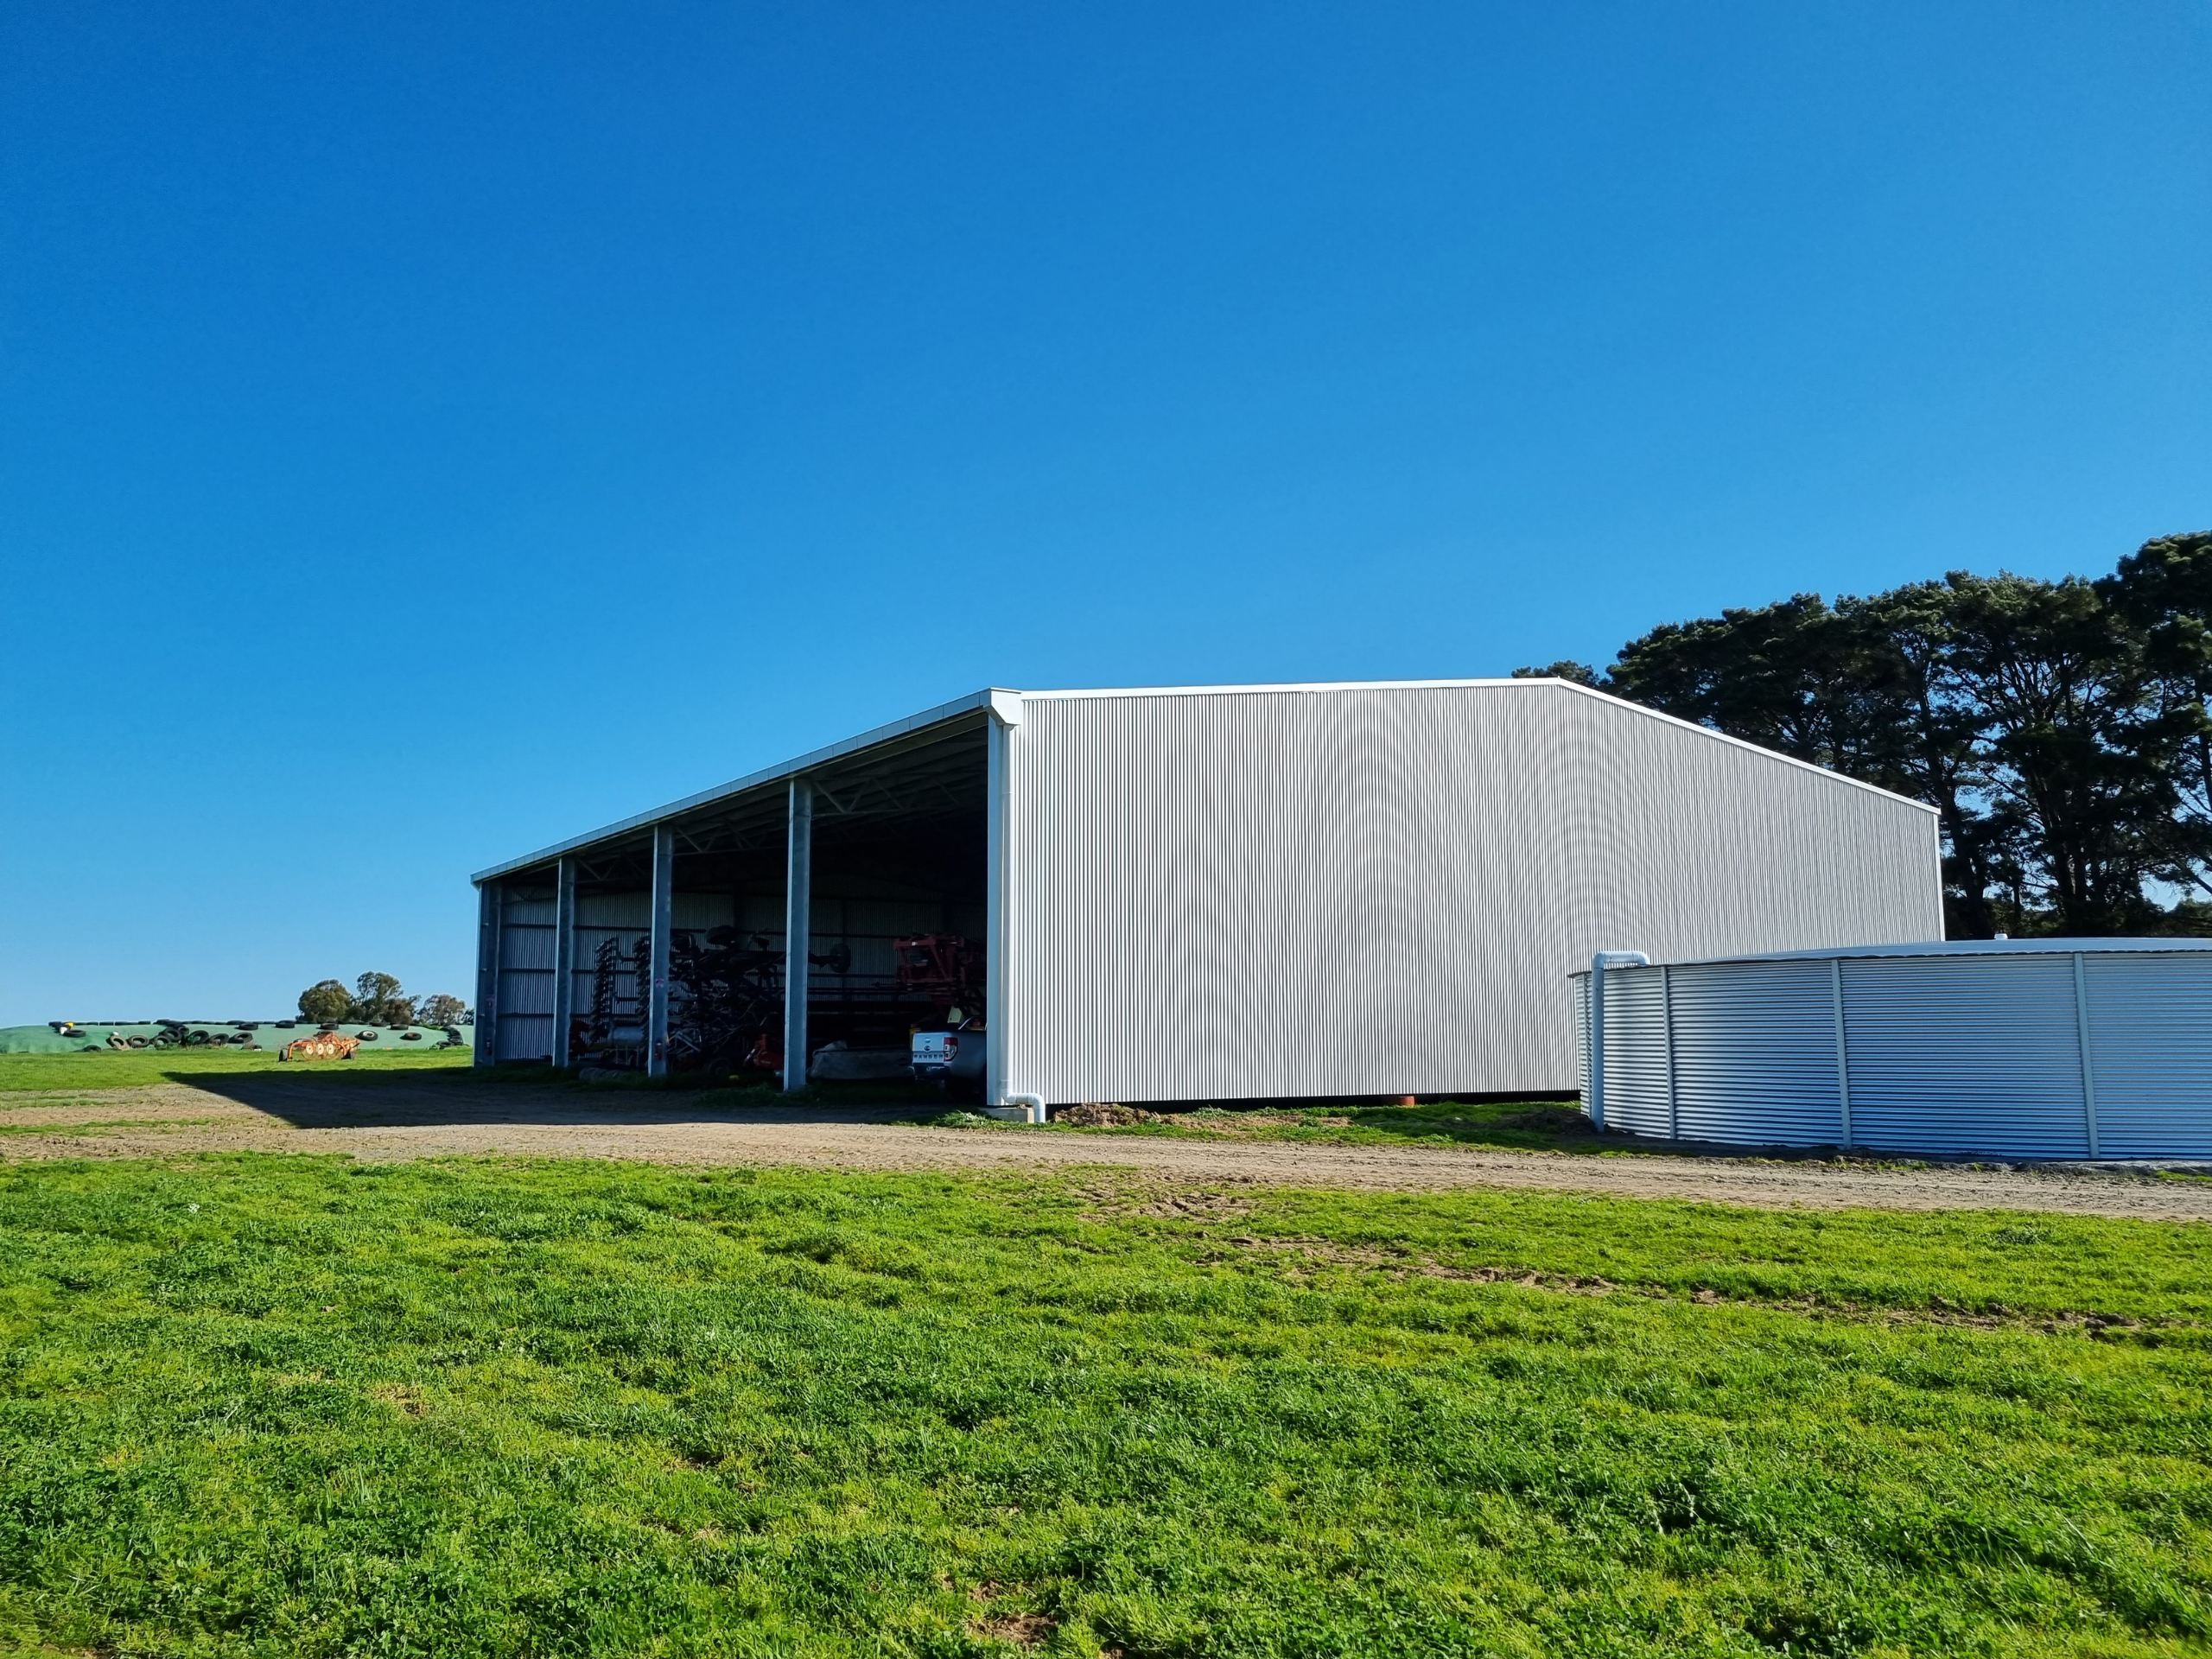 You are currently viewing 32m x 24m x 6m open-front machinery shed